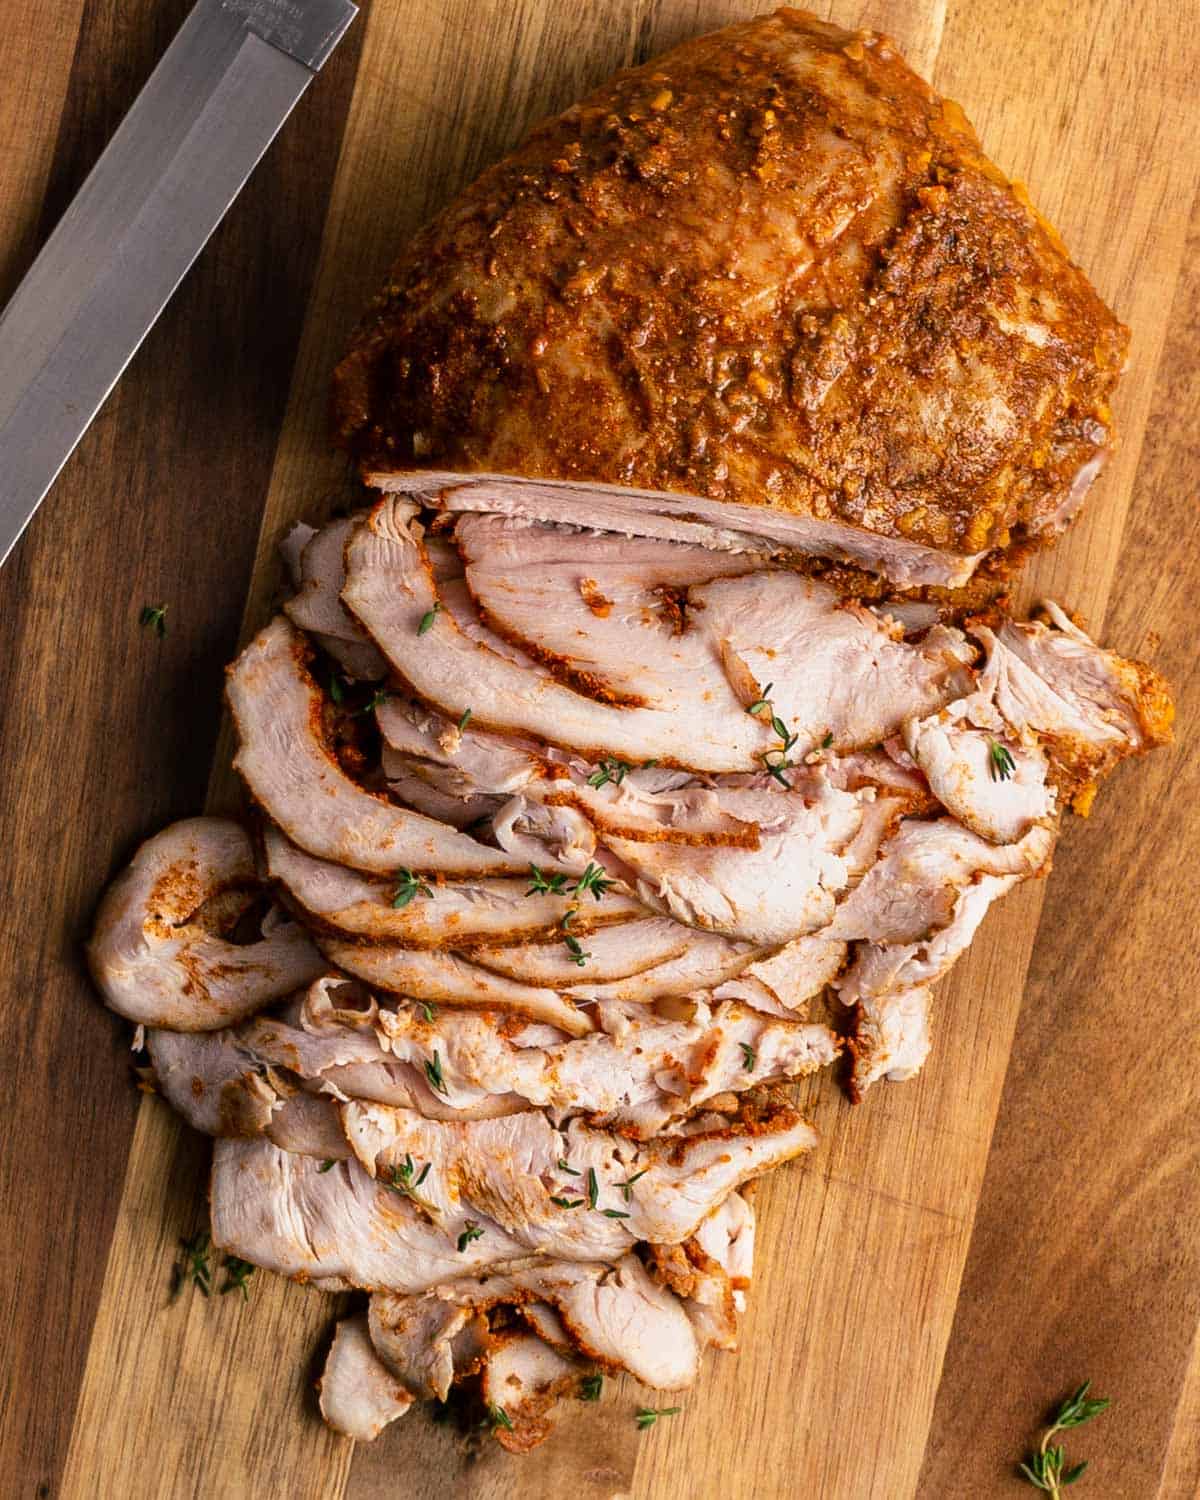 Sous vide cajun turkey breast sliced on a cutting board with a knife.